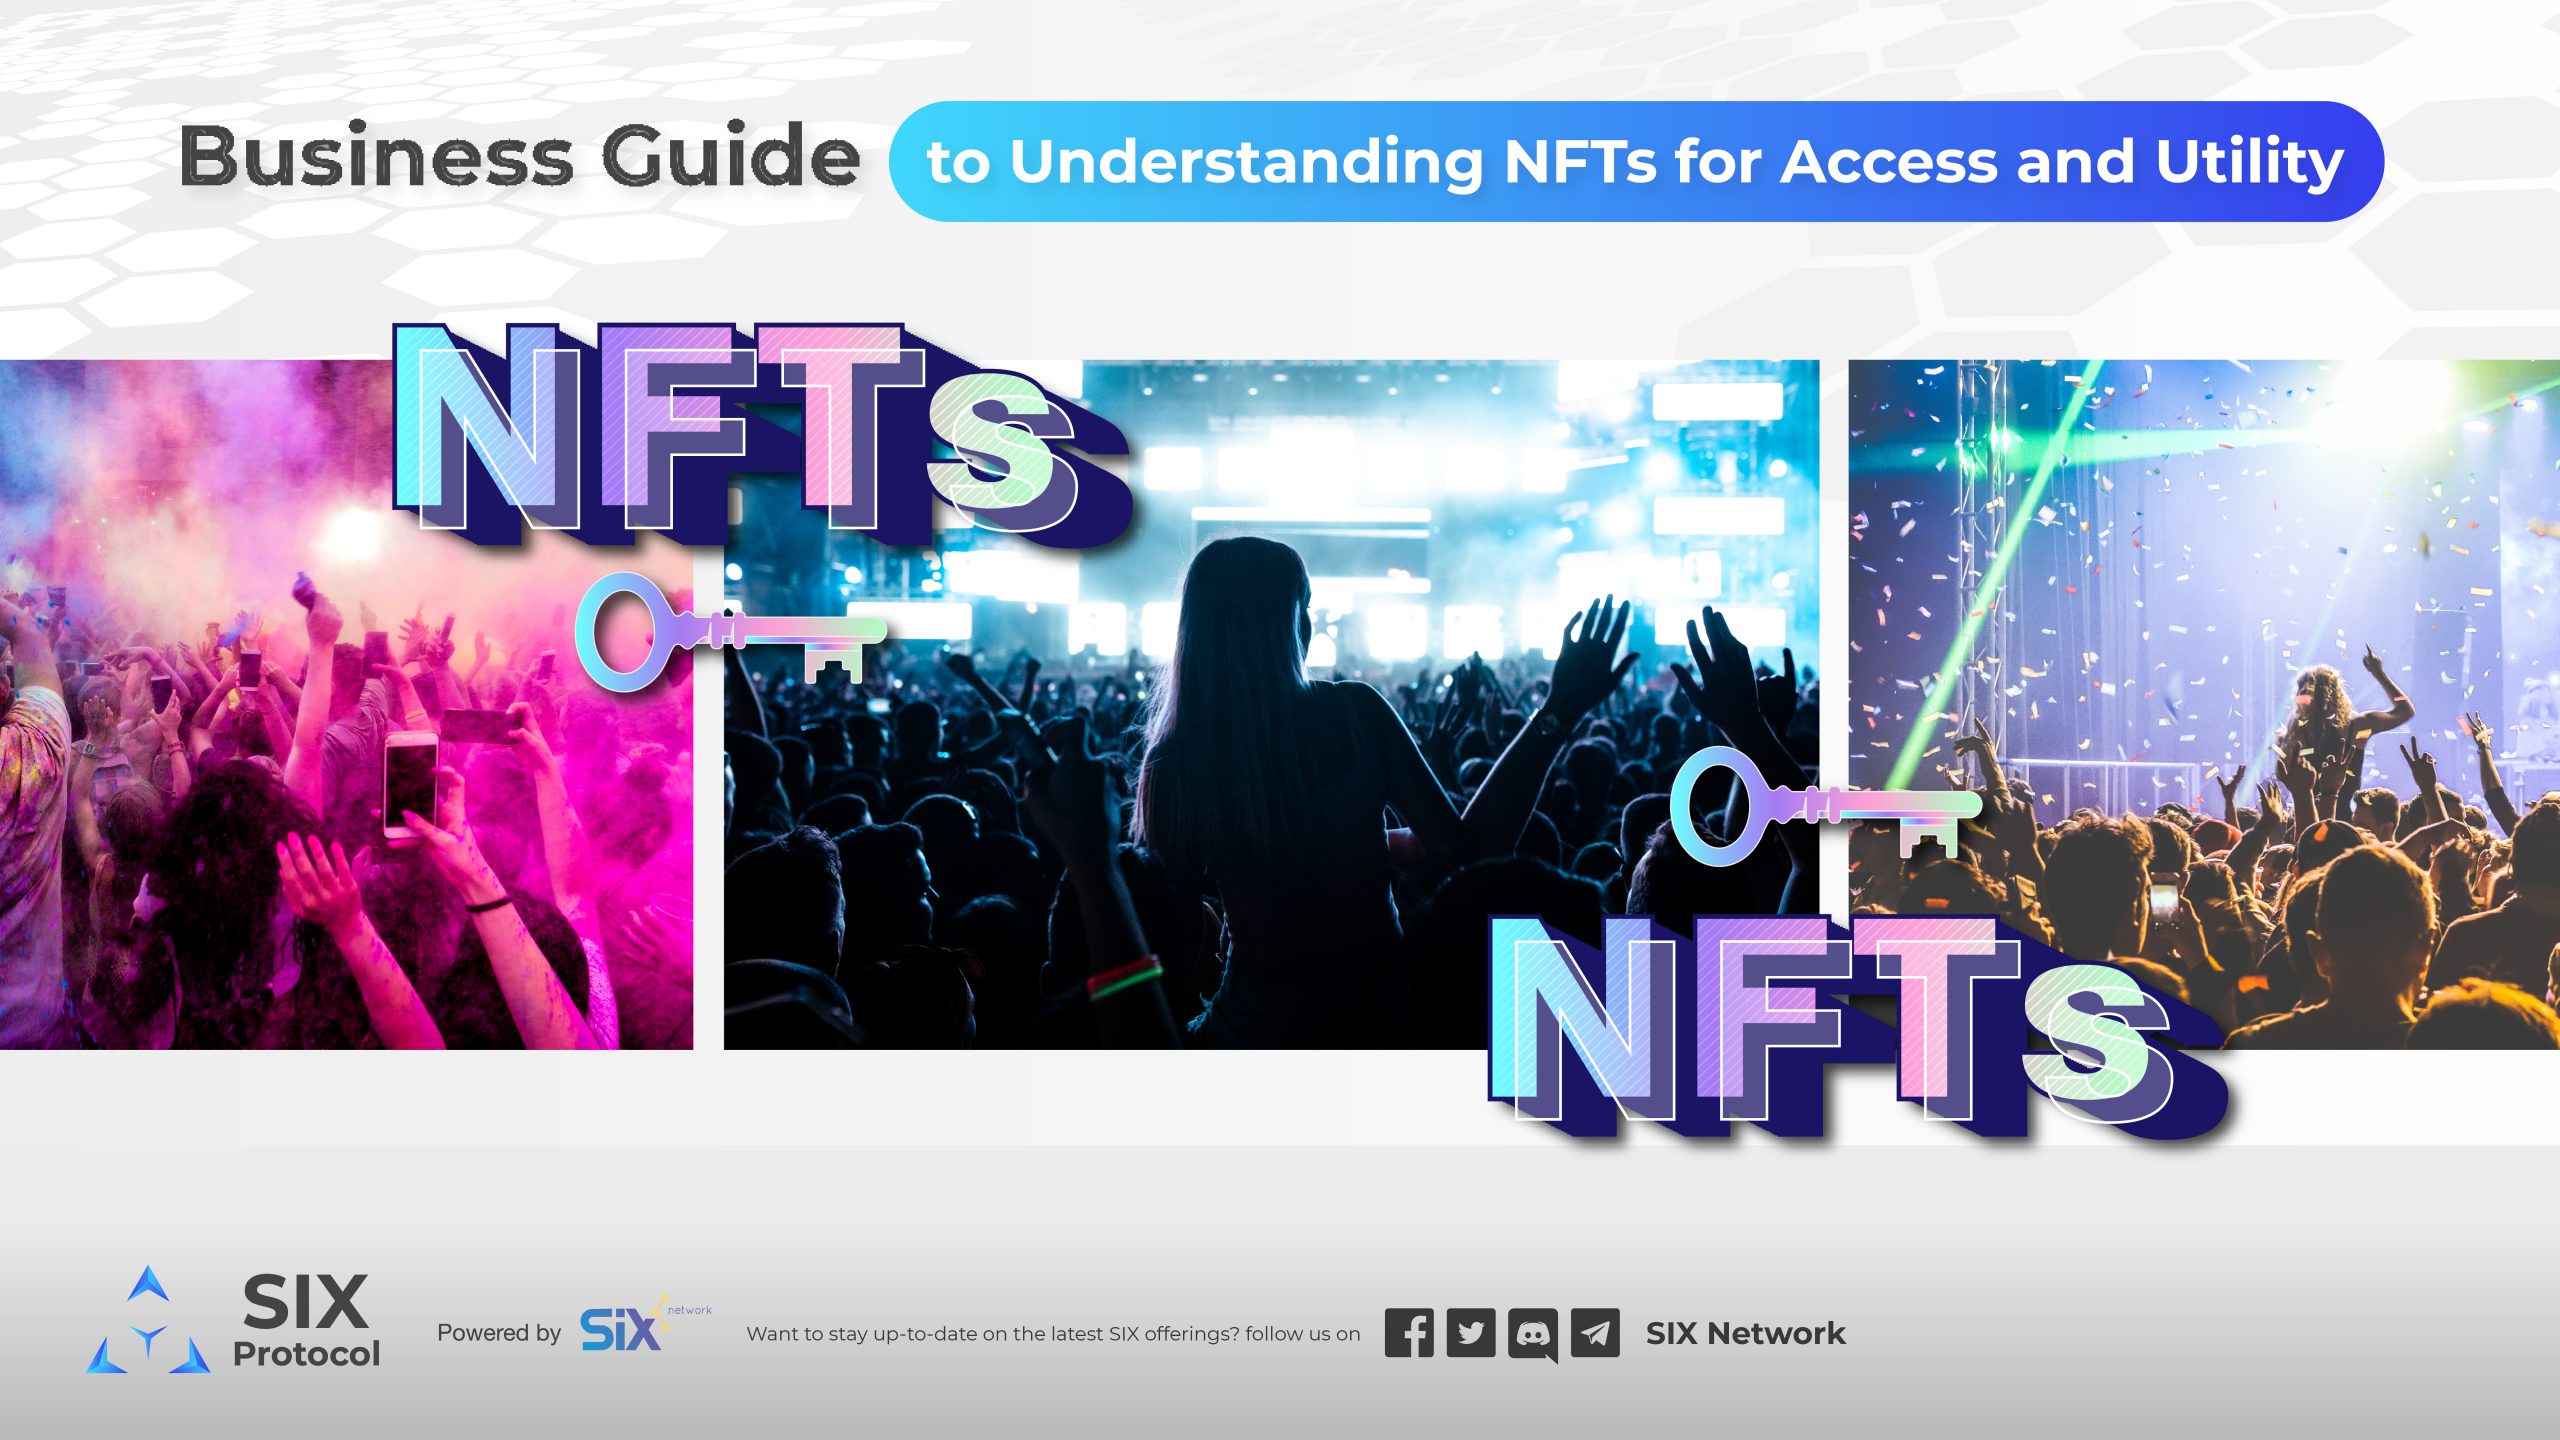 Business Guide to Understanding NFTs for Access and Utility